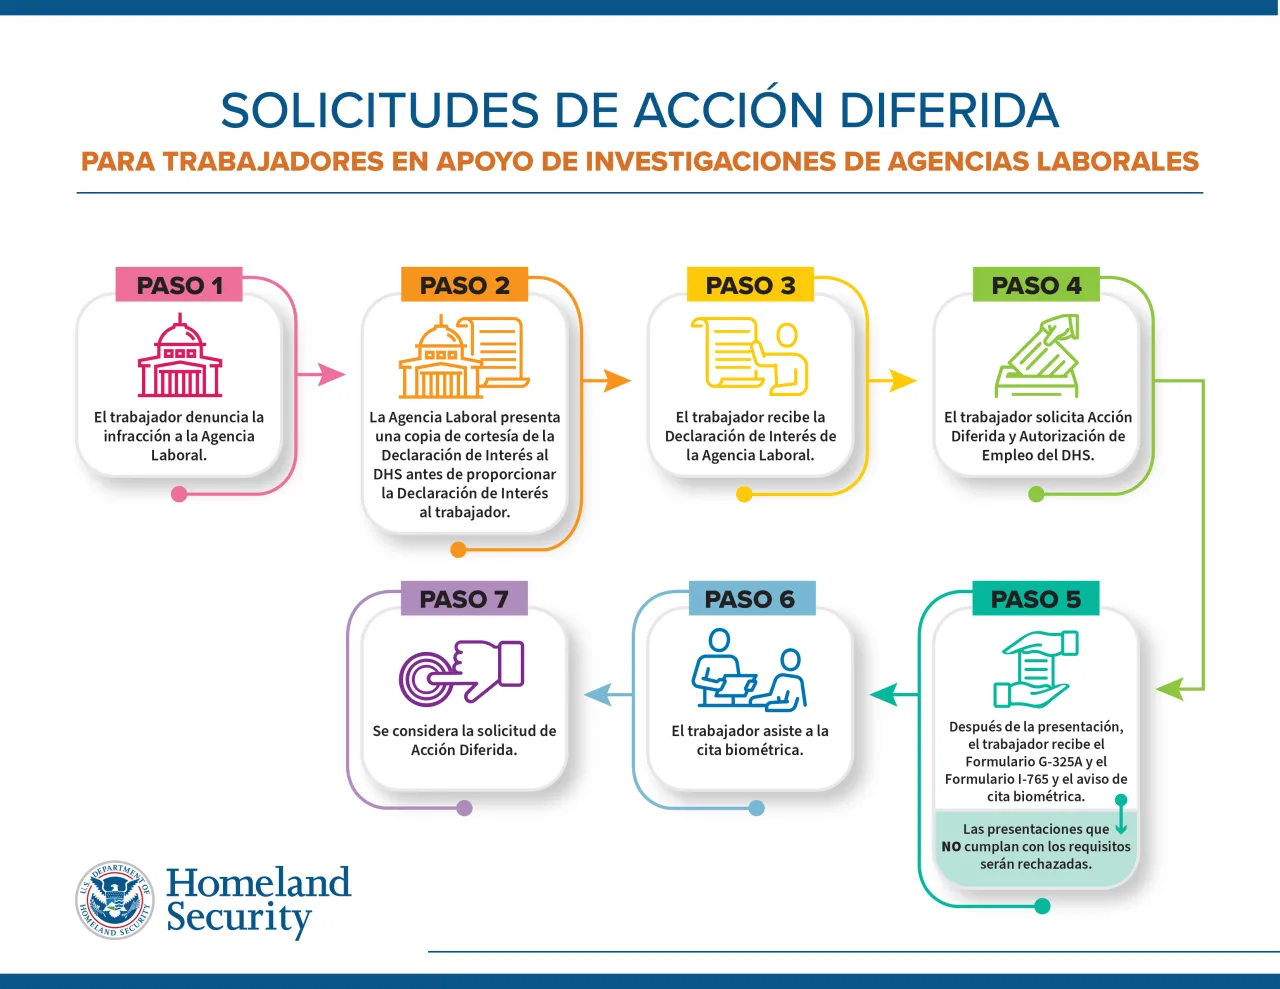 Image: Requests for Deferred Action for Workers in Support of Labor Agency Investigations Spanish Infographic